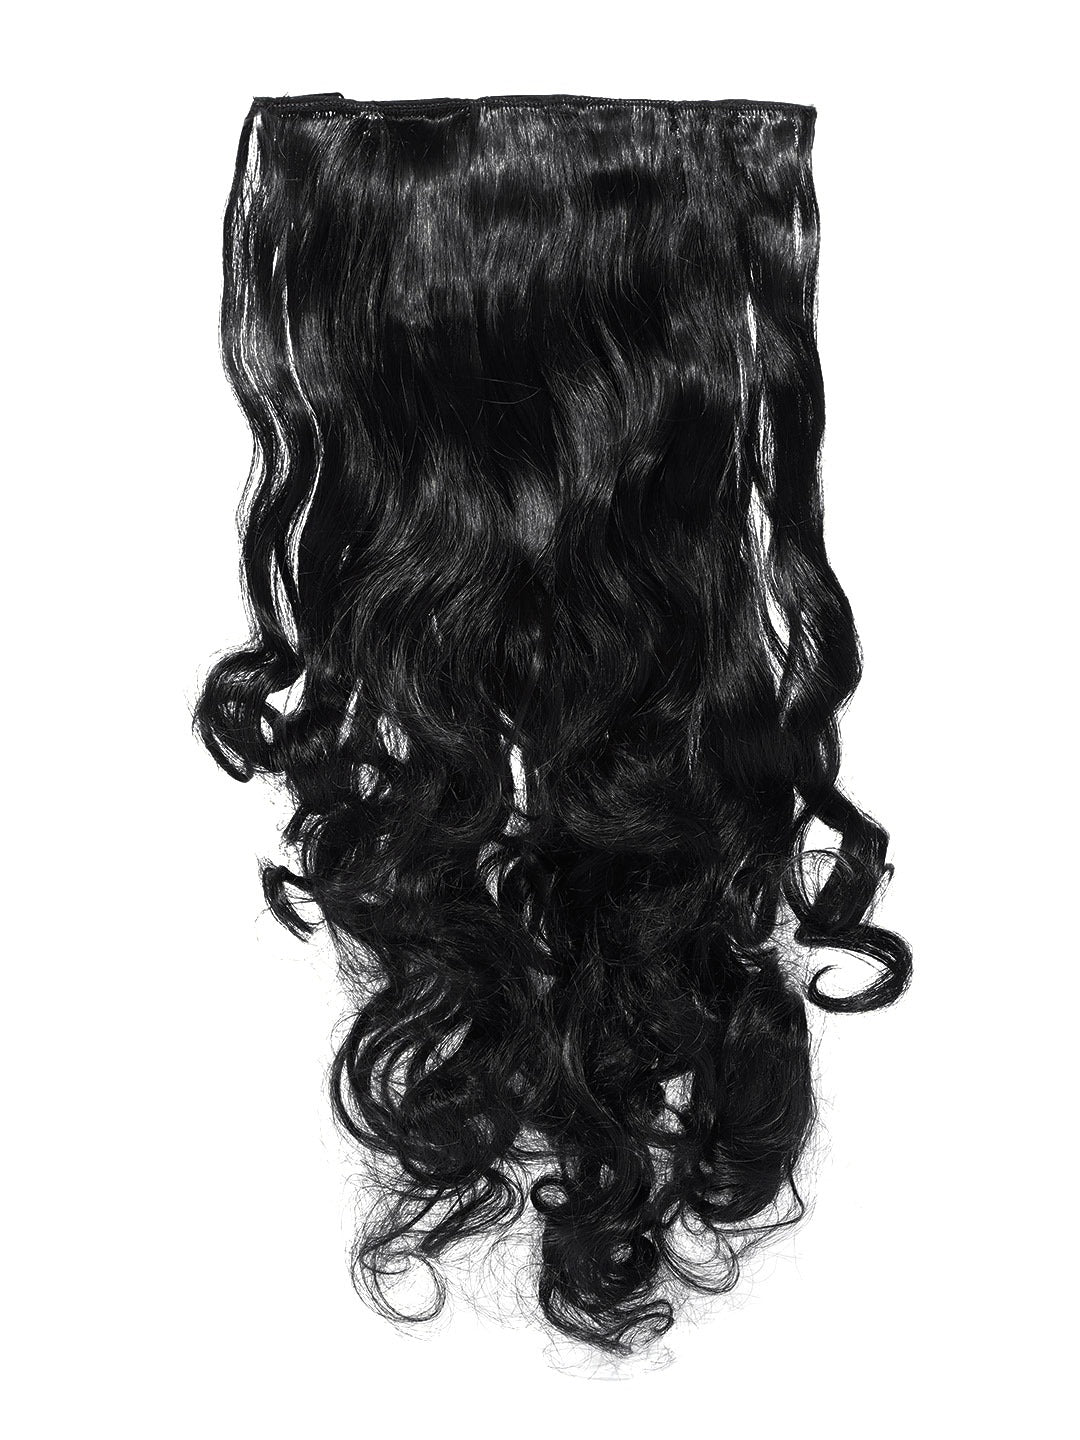 Blueberry Black Curly/Wavy premium Hair Extension with 5 clips